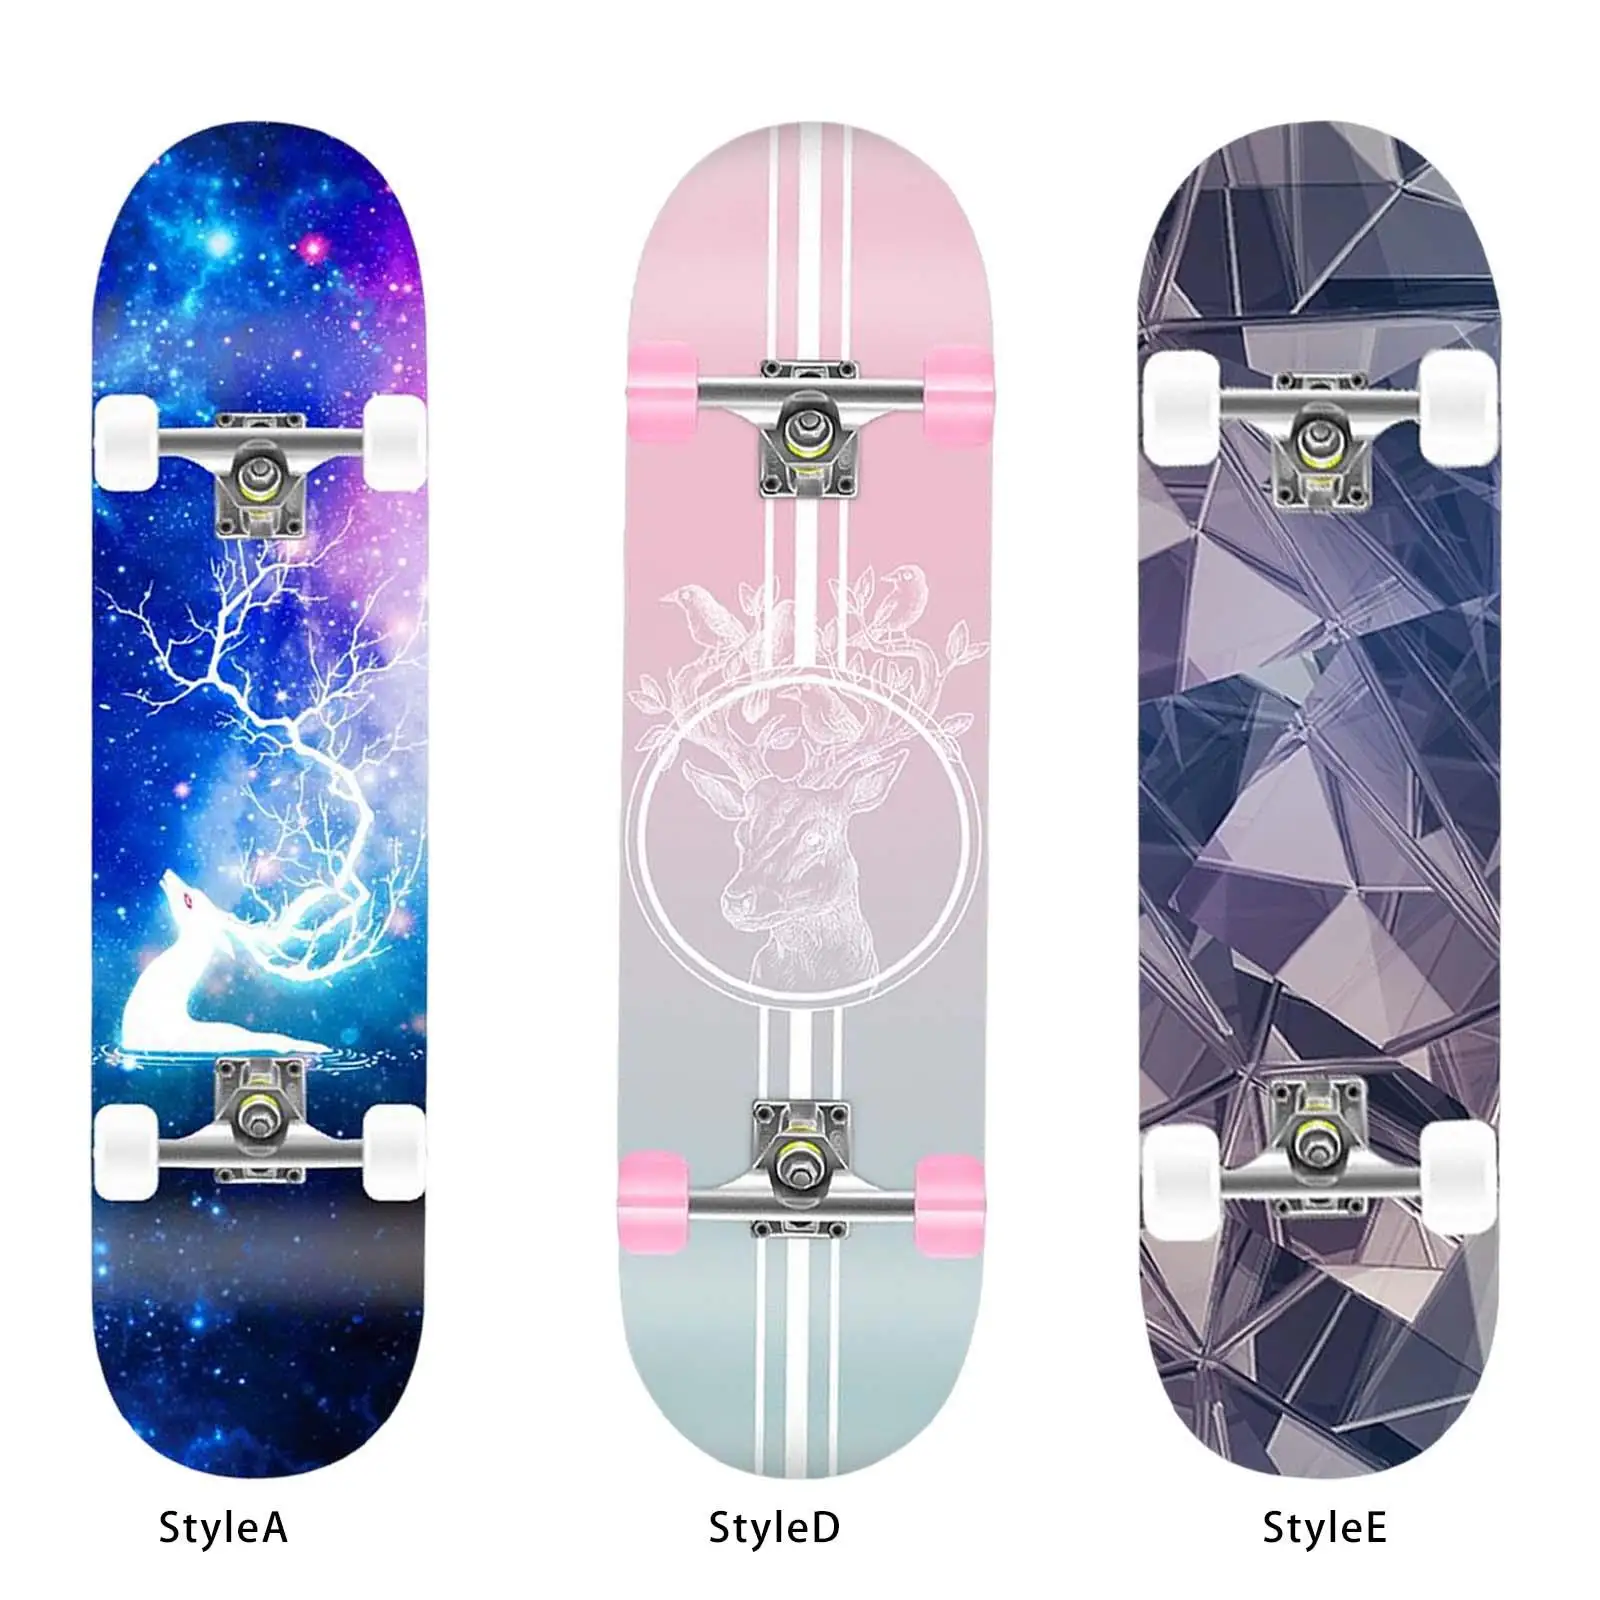 Unisex Skateboard Complete Double Kick Steel Bearing PU Wheel Maple Long Board Concave for Beginners Adults Youth Playing Kids